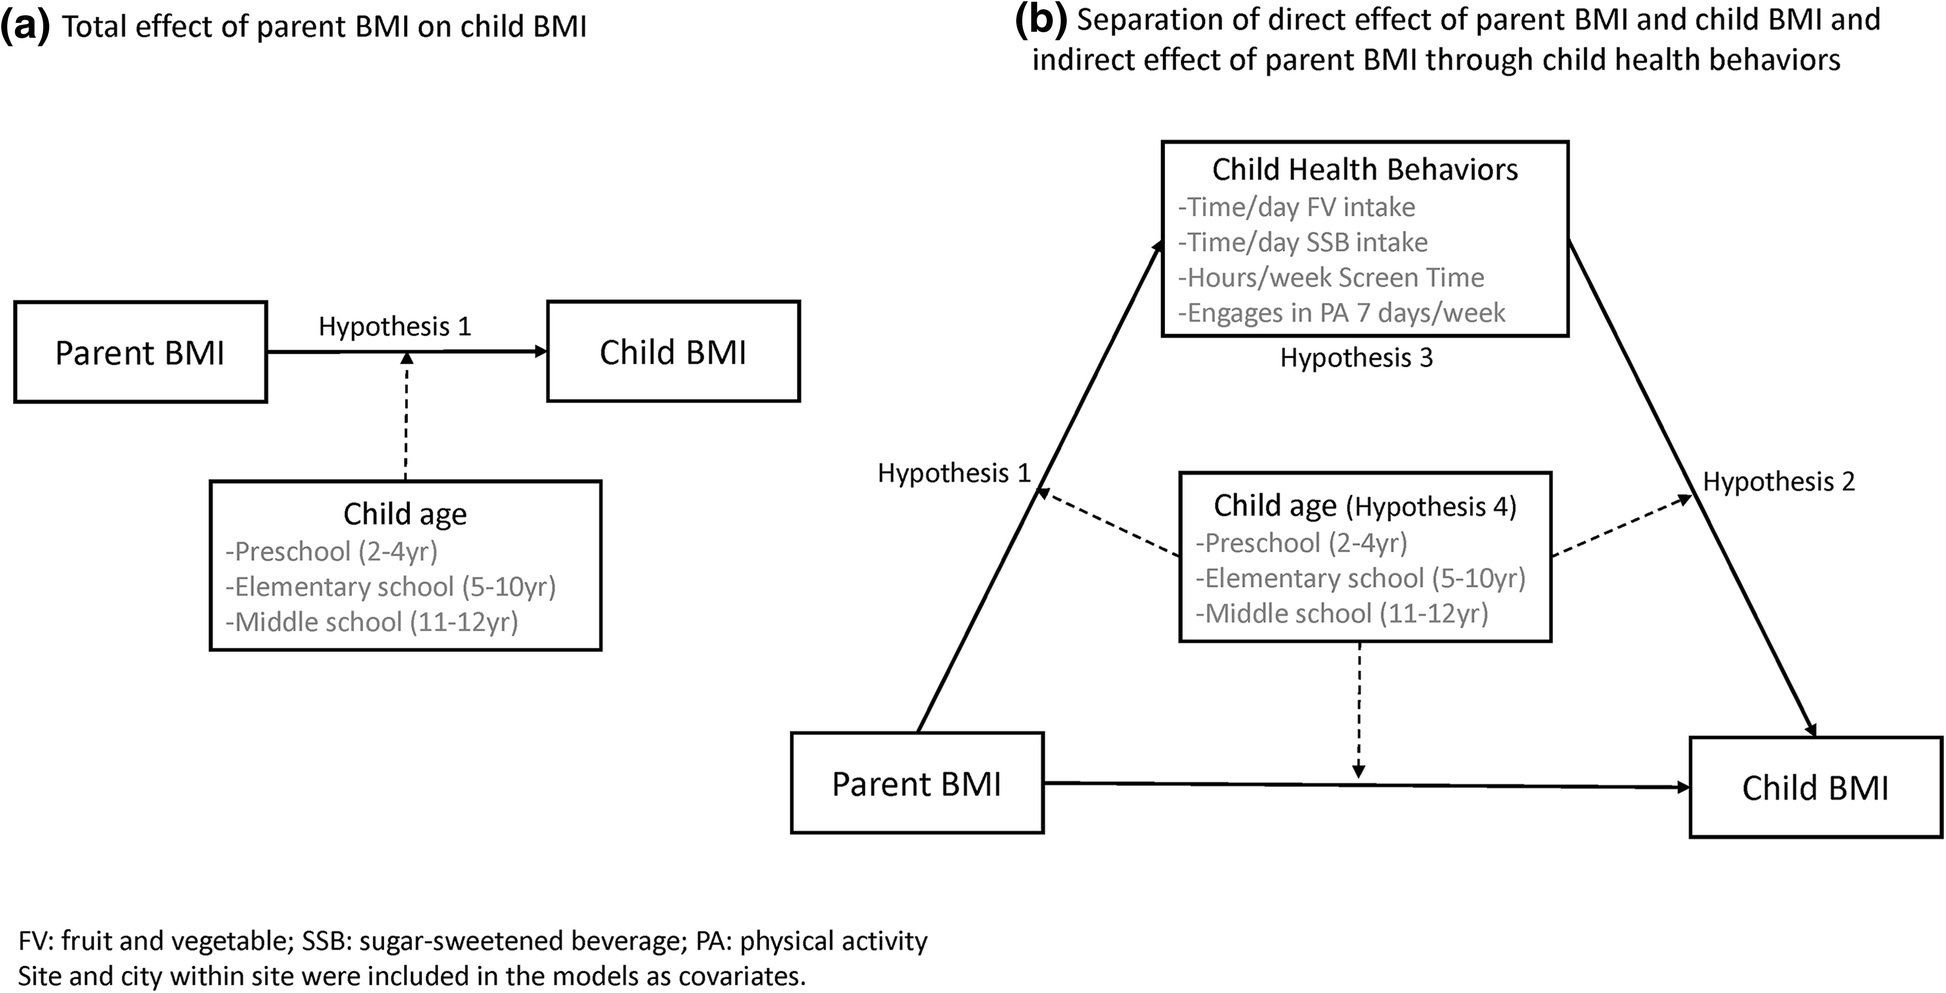 (a) Total effect of parent BMI on child BMI. (b) Direct effect of parent an...